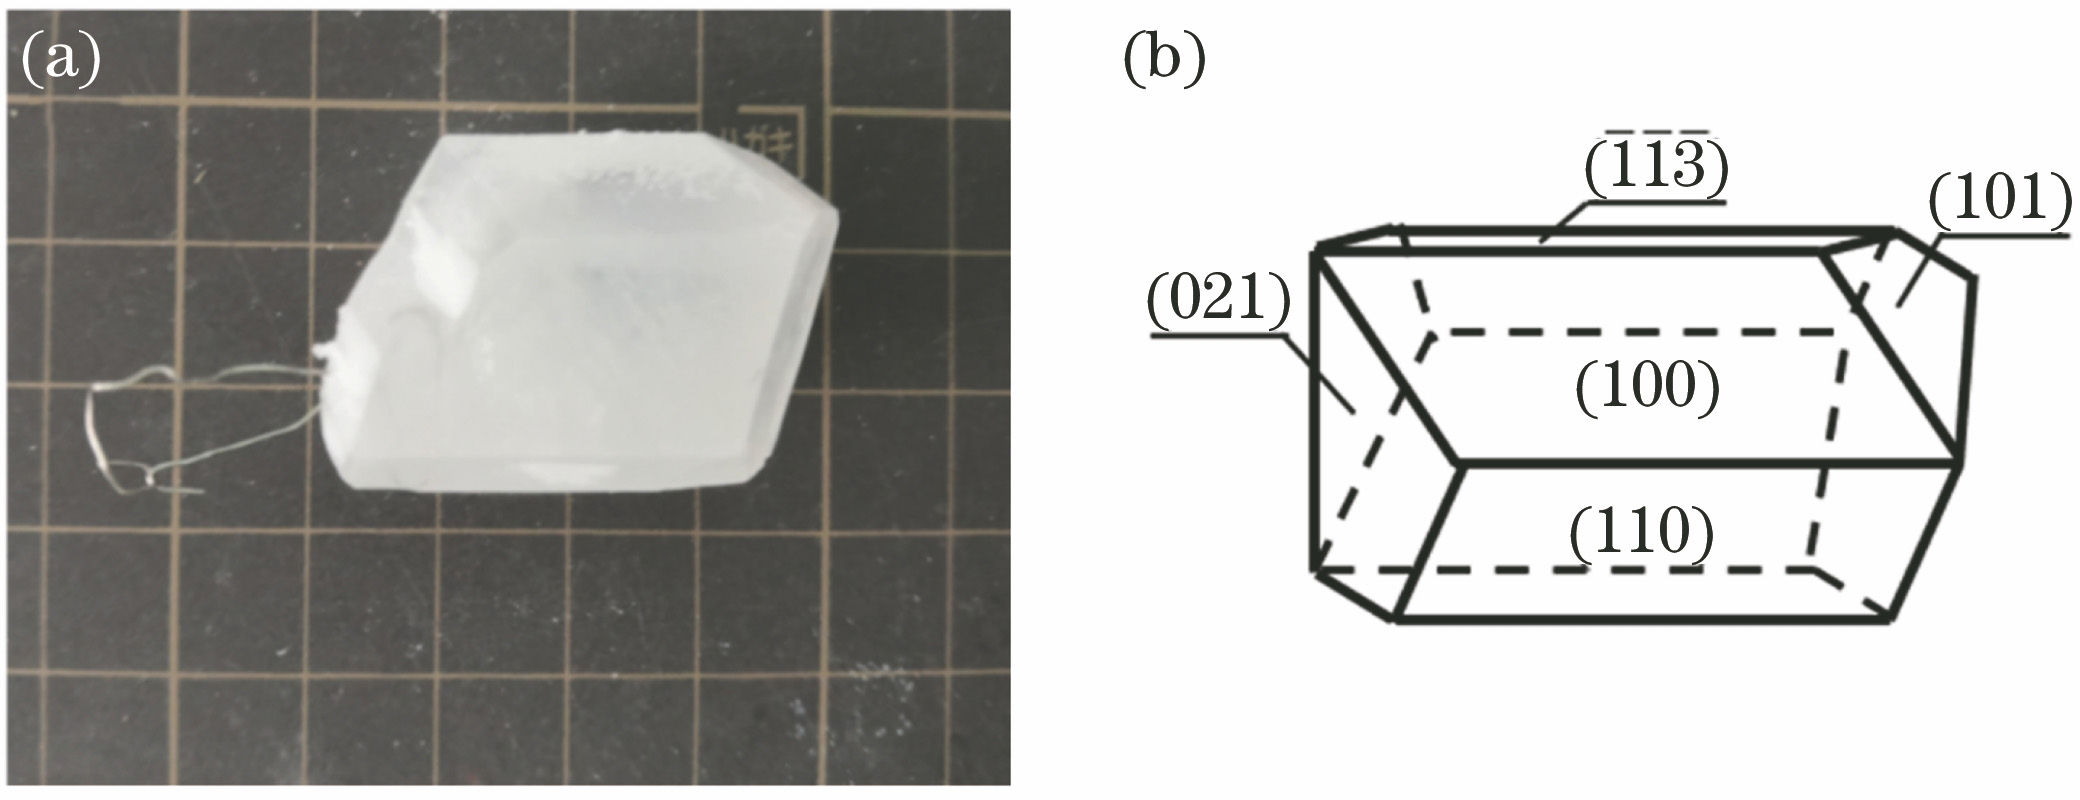 LMO ingot grown with our aqueous solution method and its outline drawing. (a) Photo of LMO ingot; (b) outline drawing